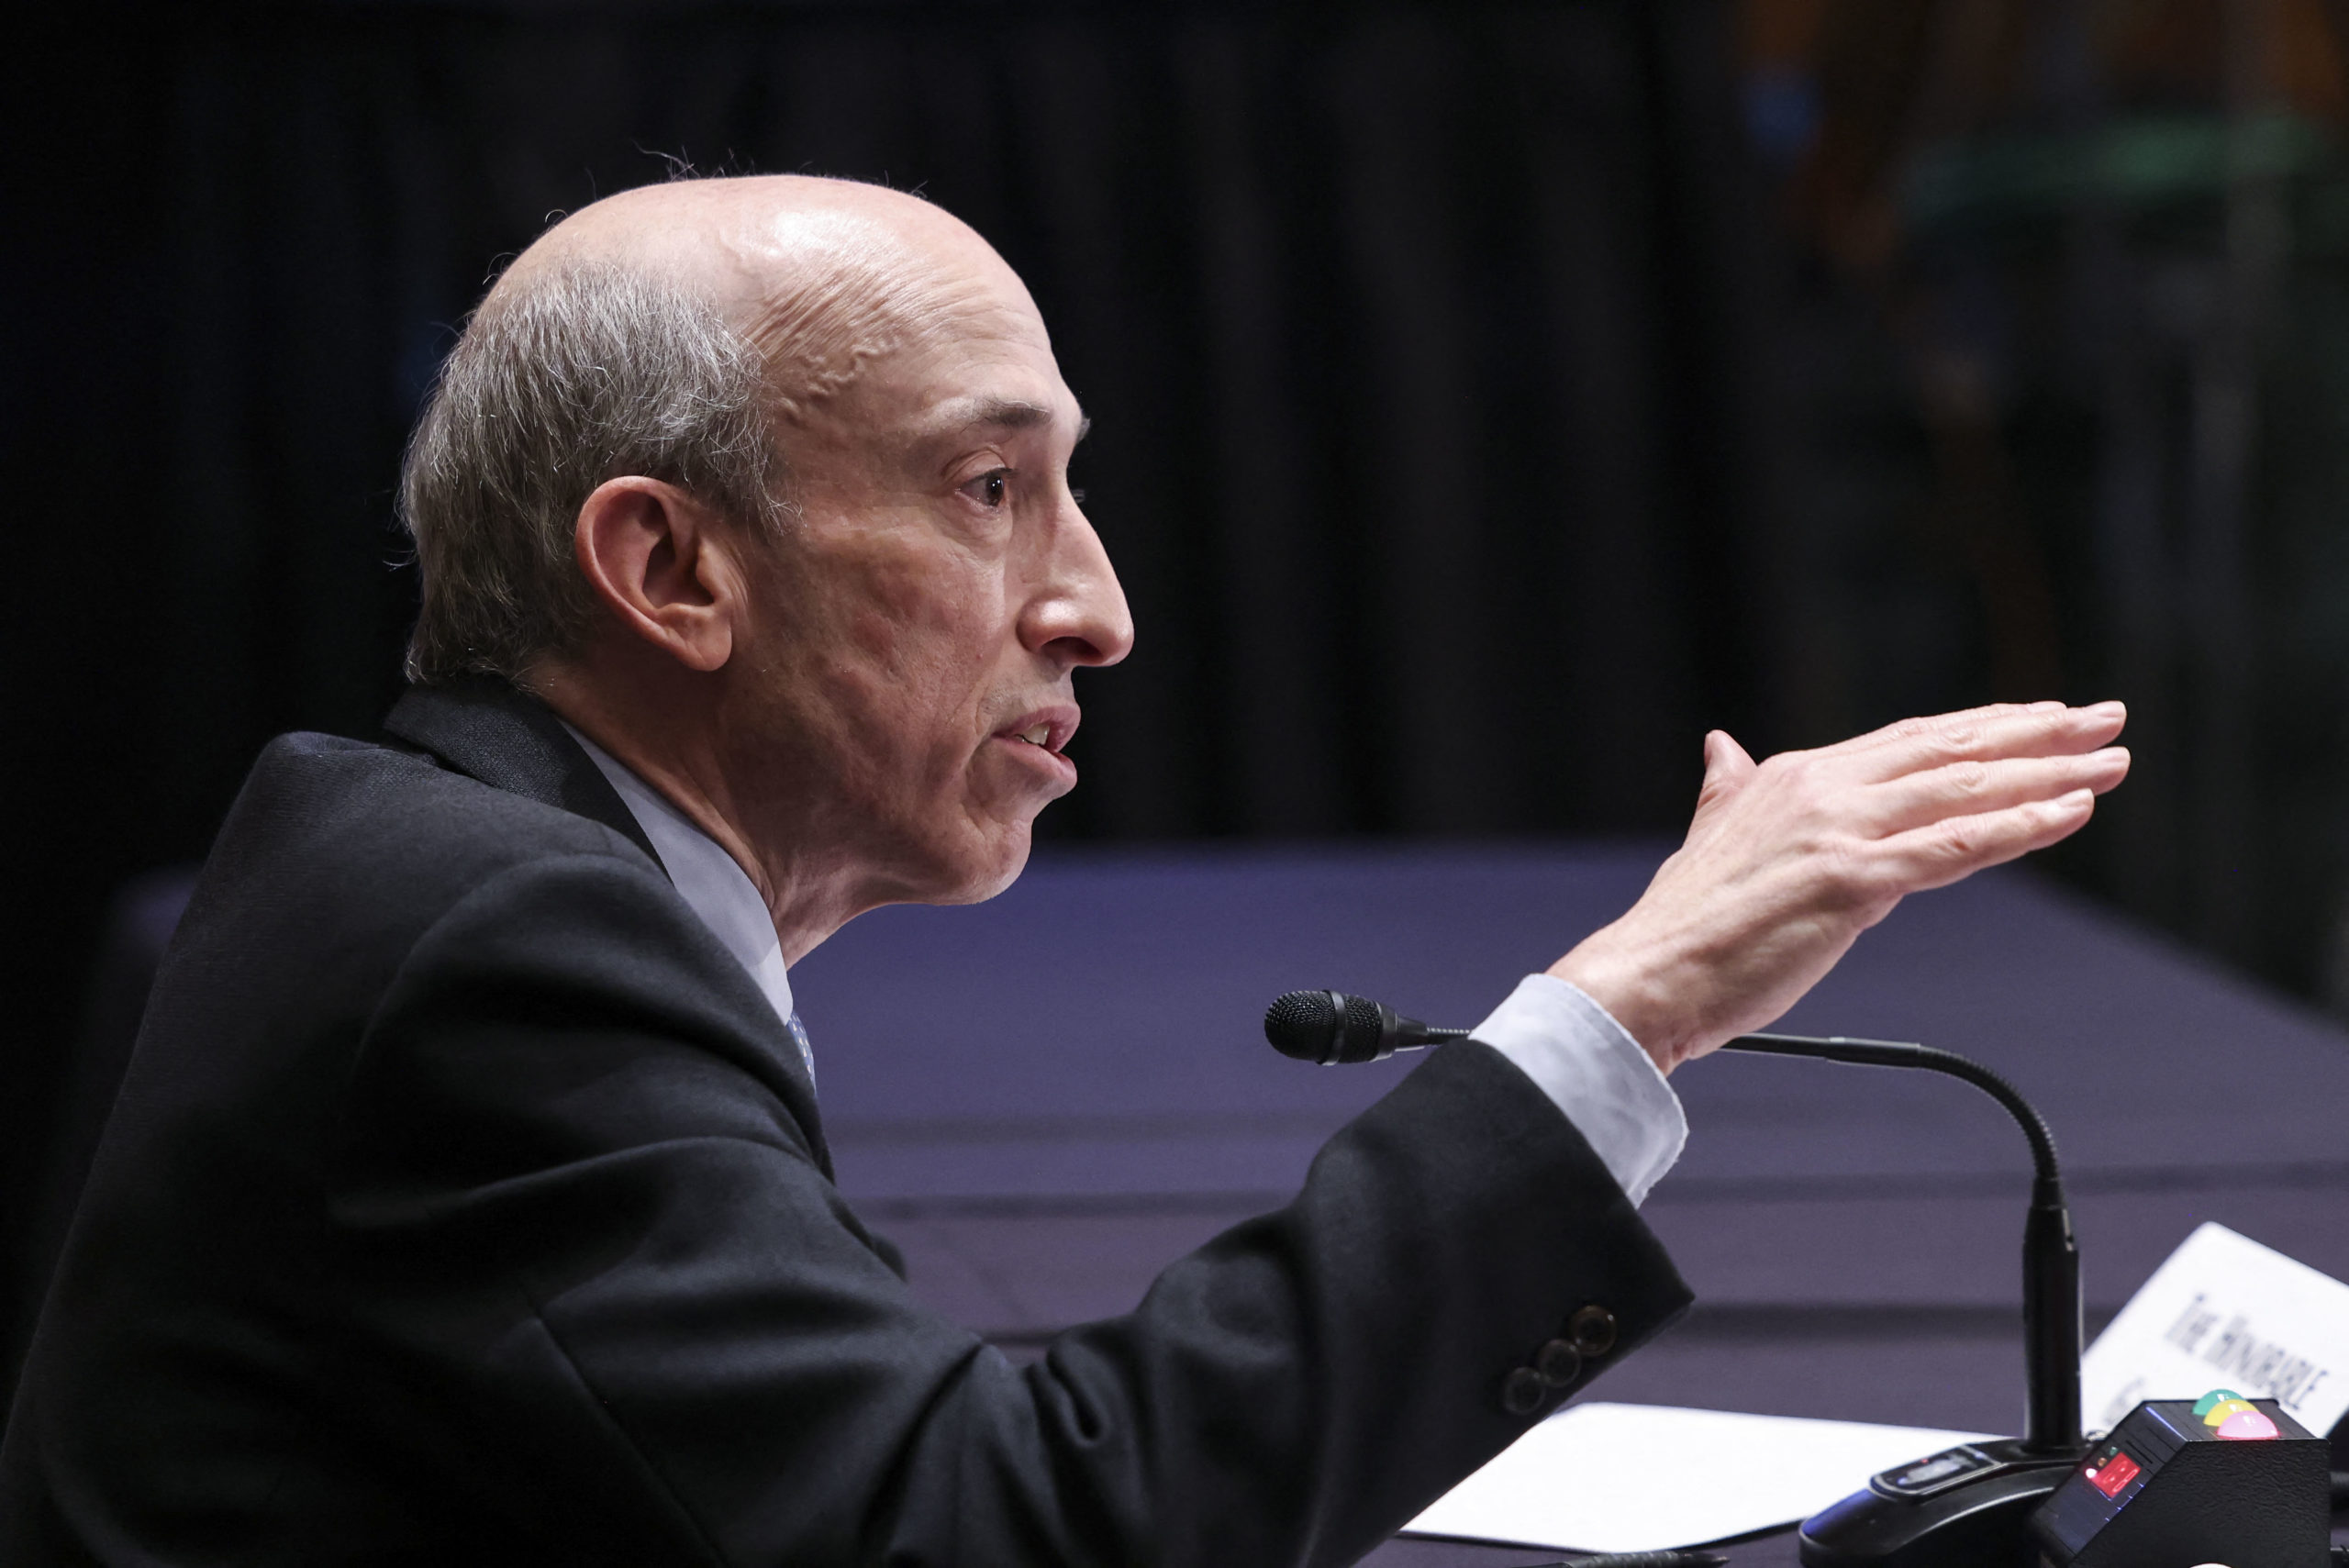 Gary Gensler, chair of the Securities and Exchange Commission, testifies during a Senate Banking Committee hearing on Sept. 14. (Evelyn Hockstein/Pool/AFP via Getty Images)